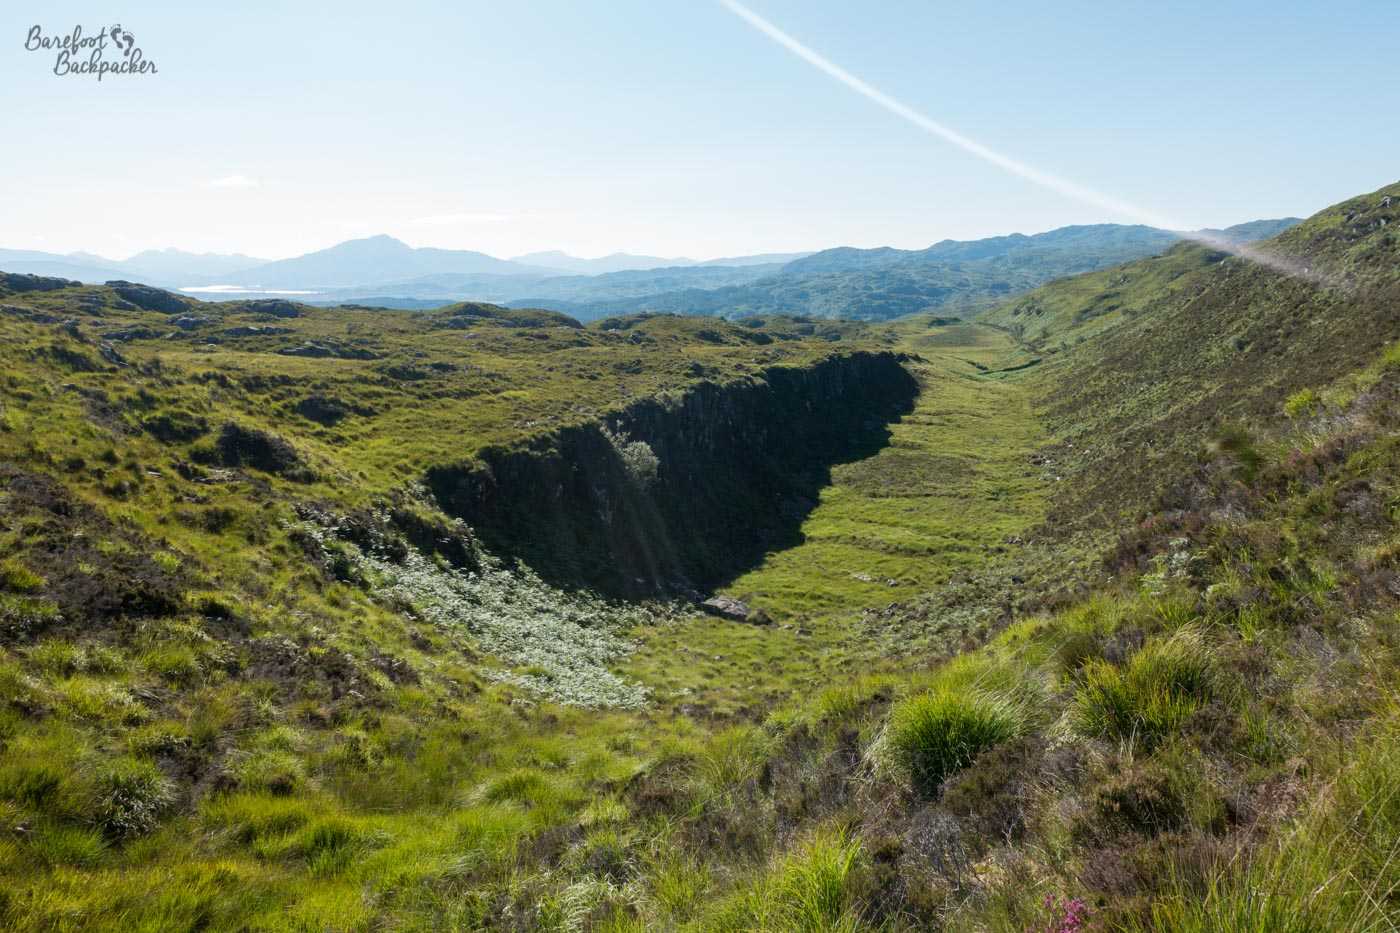 What appears to be a small dry chasm, green and thick with grasses. The right side is a steep but gradual slope up to a ridge where there is a path. The left side is a sheer cliff up to a ridge covered in shrubs and grasses. Misty blue hills in the background, bright sunshine otherwise.